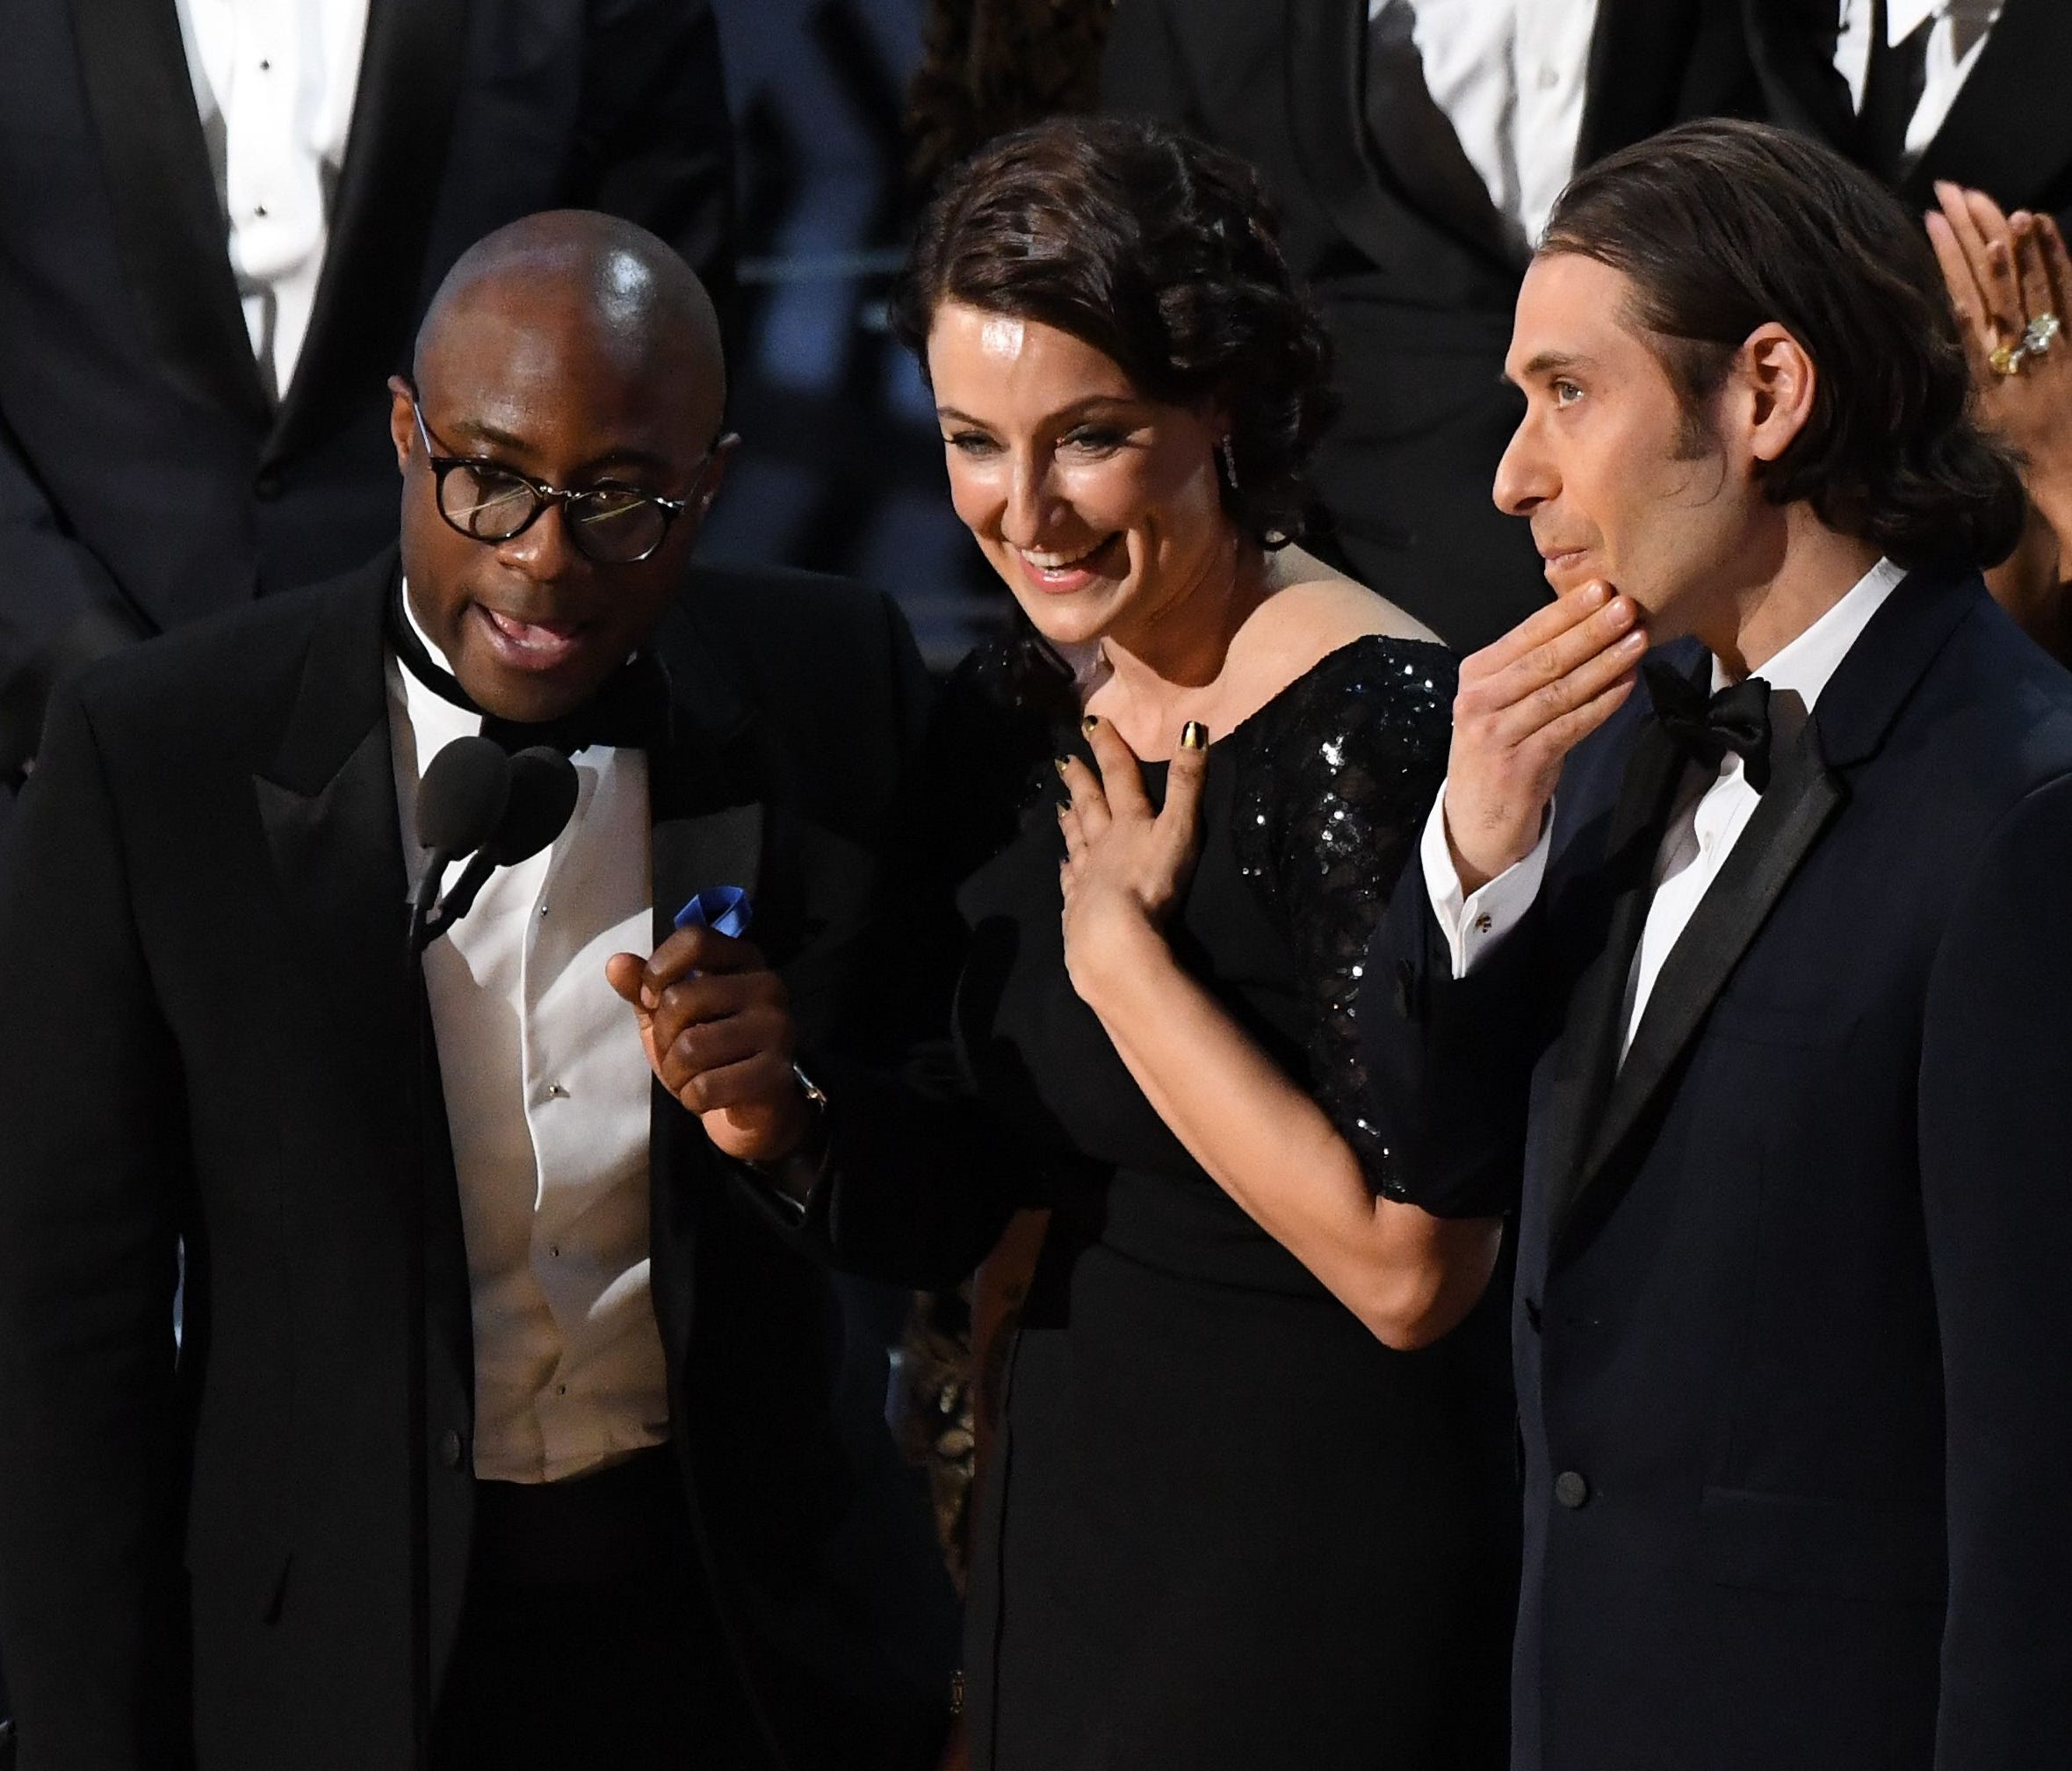 After a two-minute 'La La Land' win for best picture was a mistake, director Barry Jenkins (left) accepts the award for 'Moonlight.'